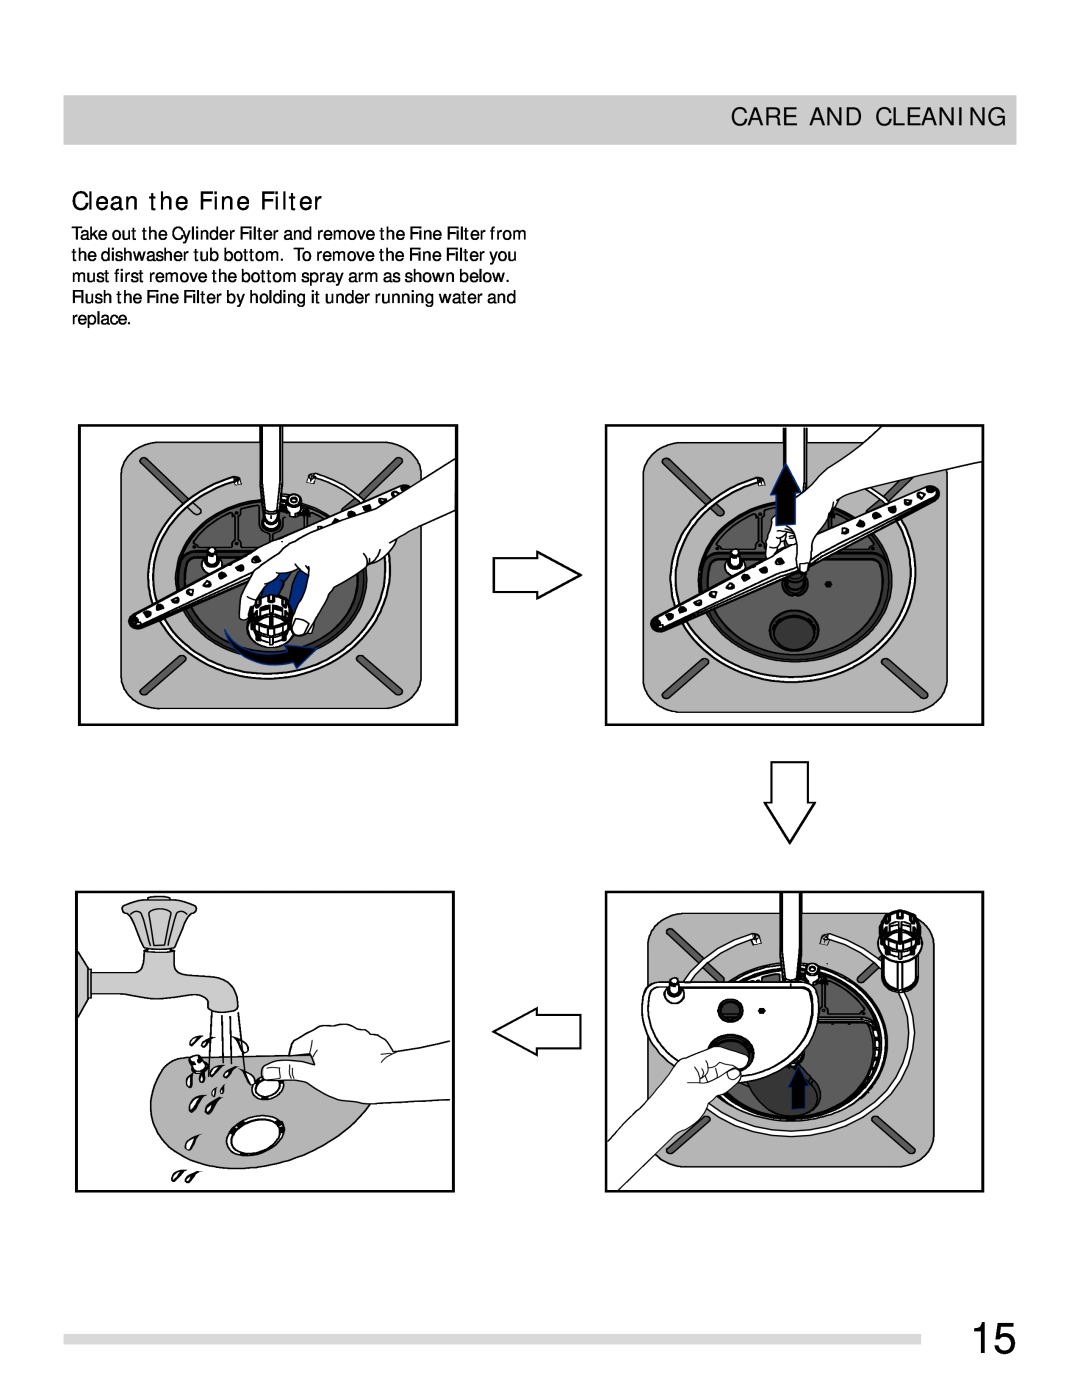 Frigidaire FPHD2491 important safety instructions Clean the Fine Filter, Care And Cleaning 